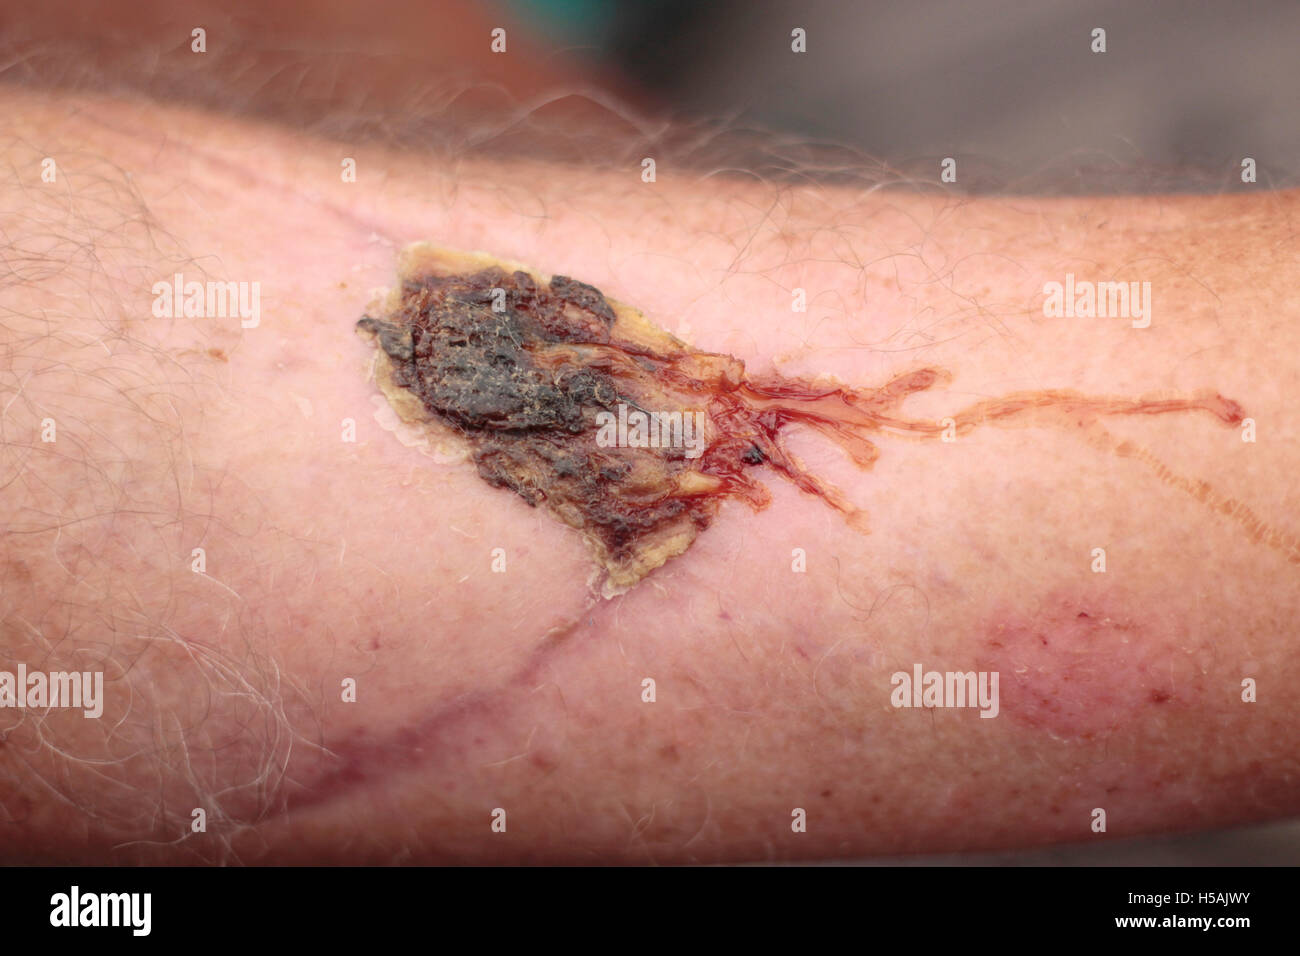 Man's leg with scar tissue and a large weeping scab Stock Photo